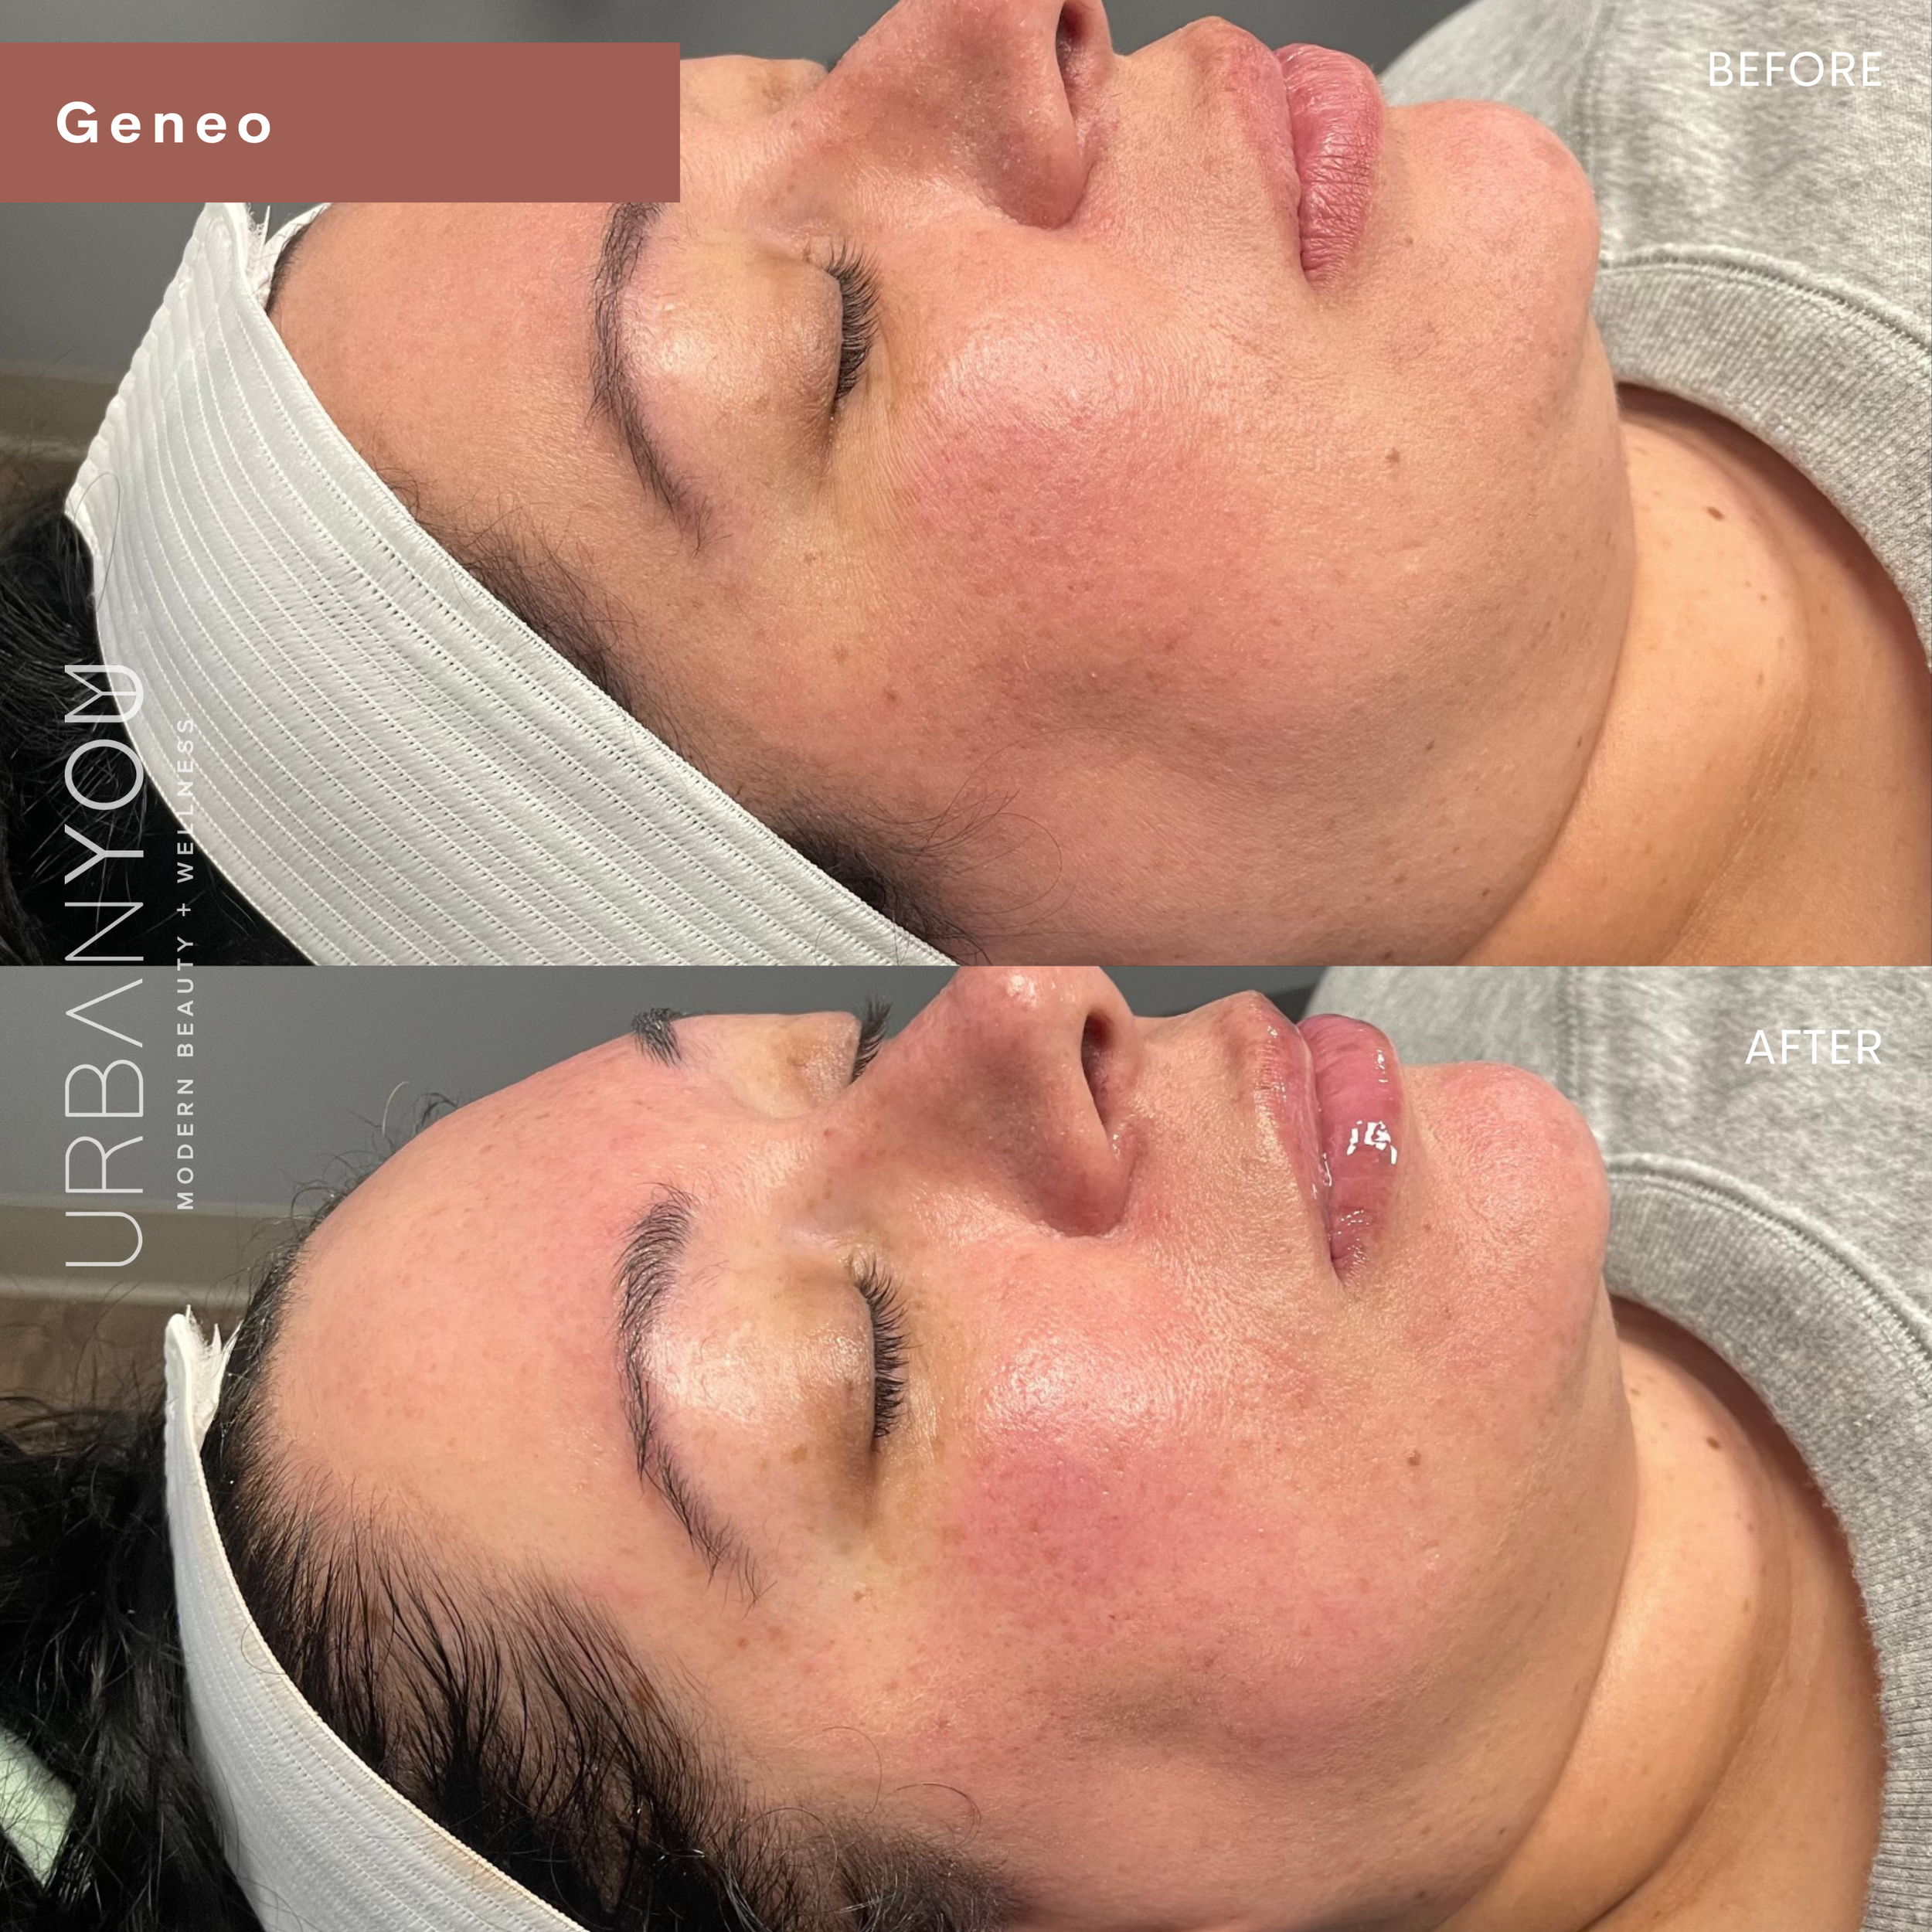 Glo2Facial / OxyGeneo before and after photo at Urban You medical spa